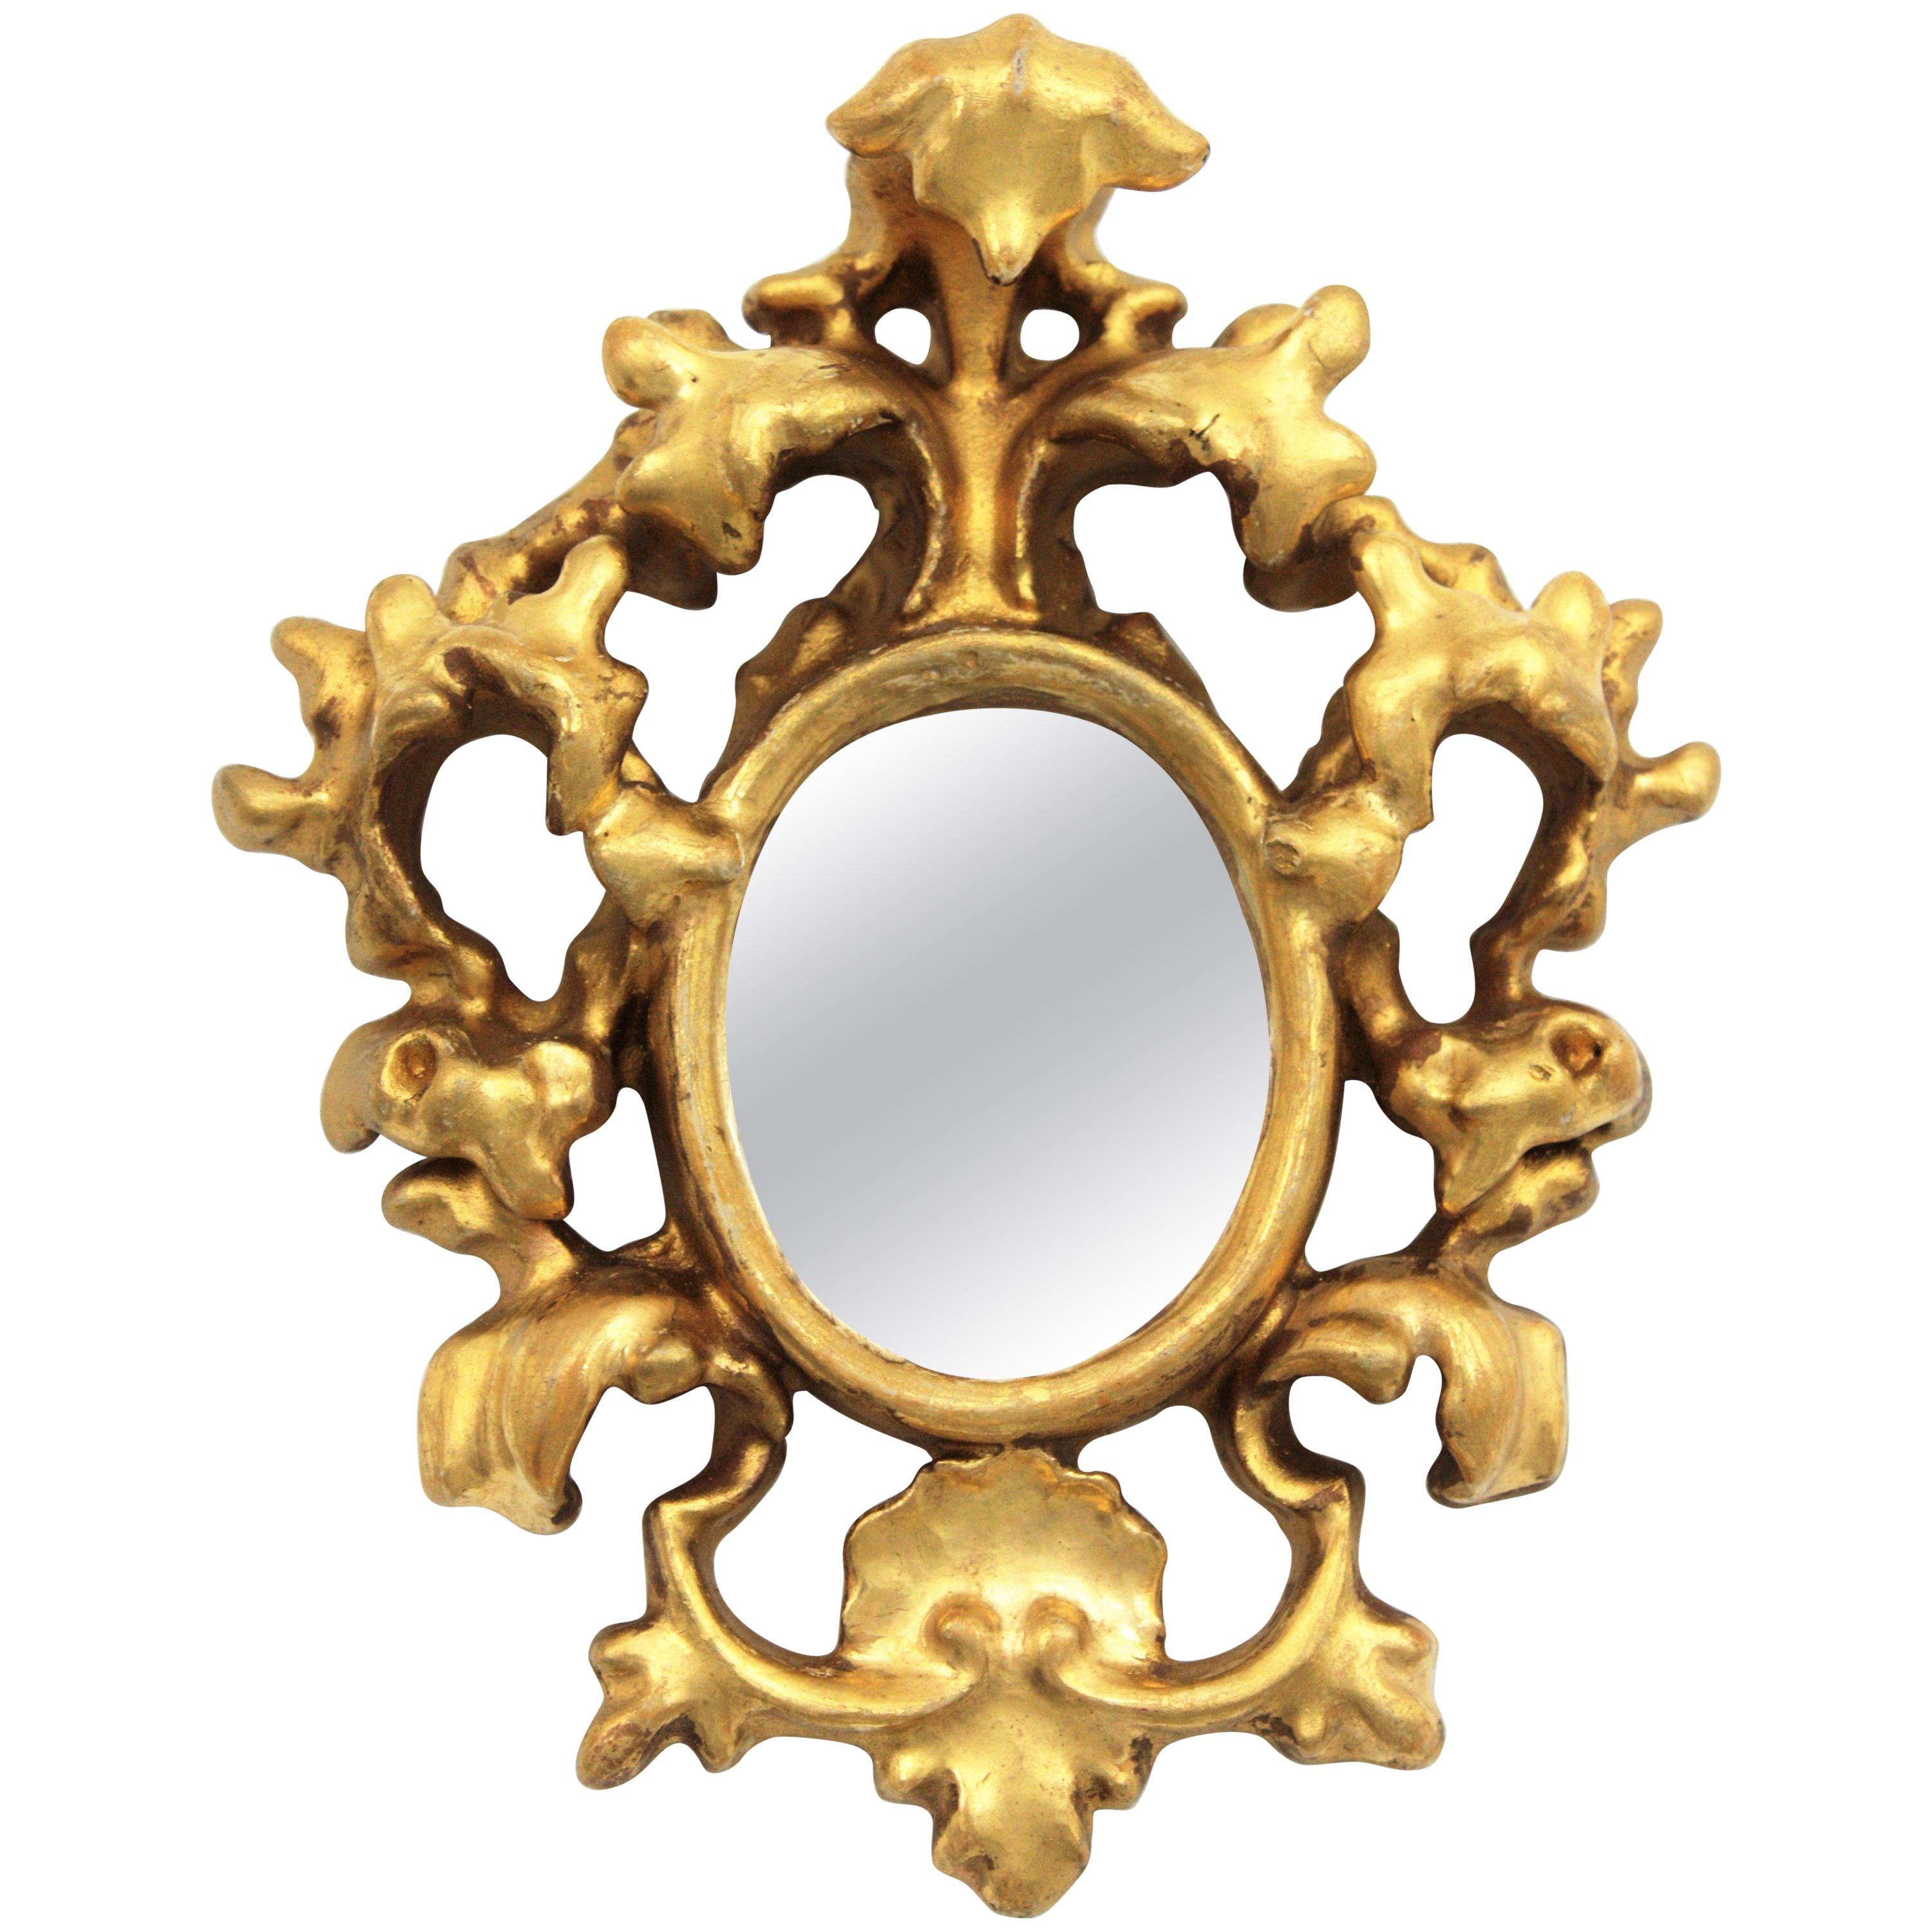 Spanish 1930s Baroque style carved gold leaf giltwood and gesso mirror miniature
Unusual Baroque style handcrafted miniature mirror made of wood and gesso and finished with gold leaf.
It has been restored preserving its original antique patina.